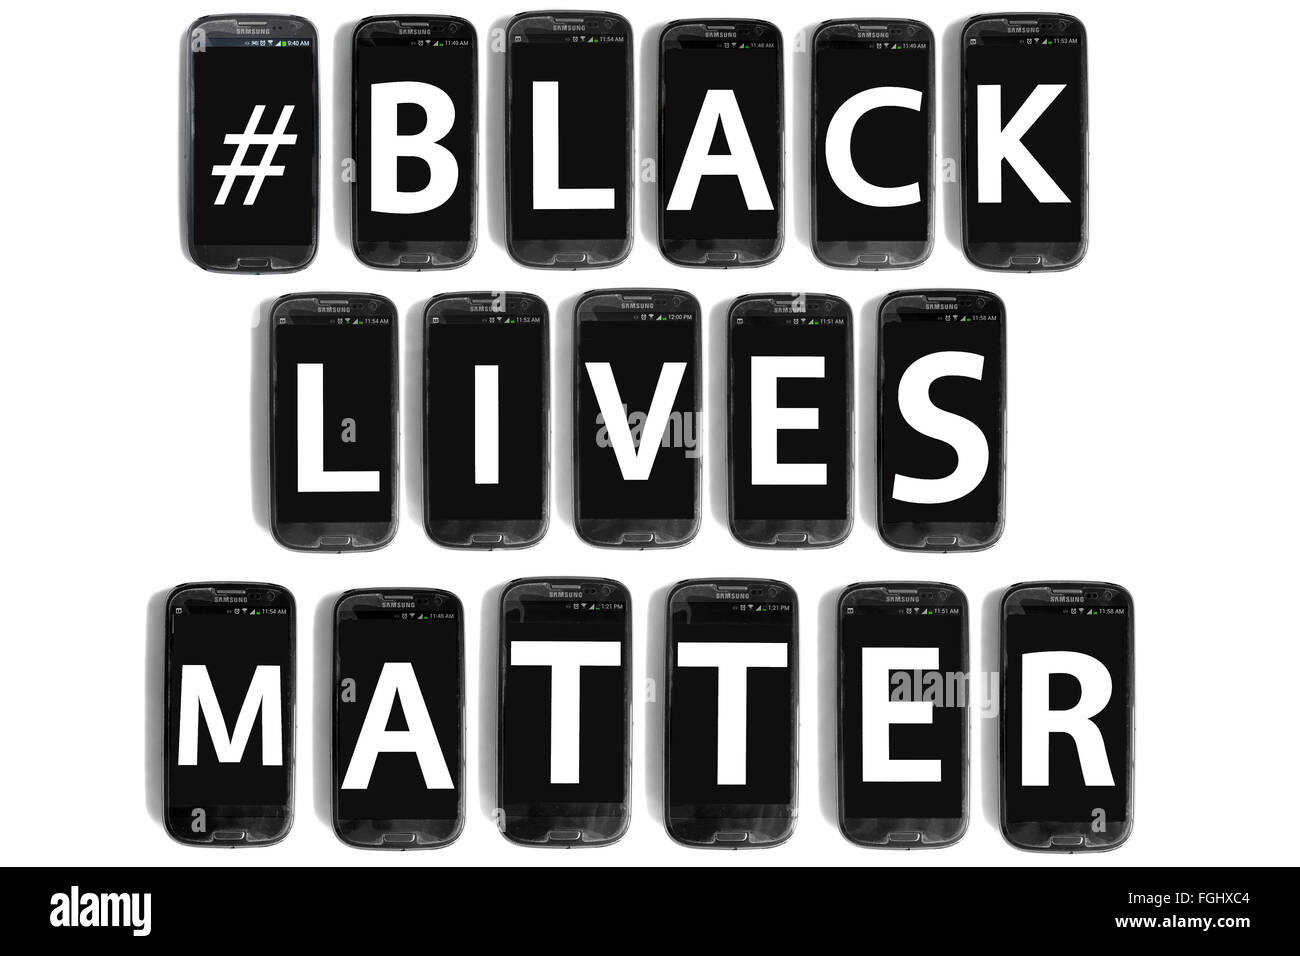 The hashtag #BlackLivesMatter written on smartphone screens photographed against a white background. Stock Photo